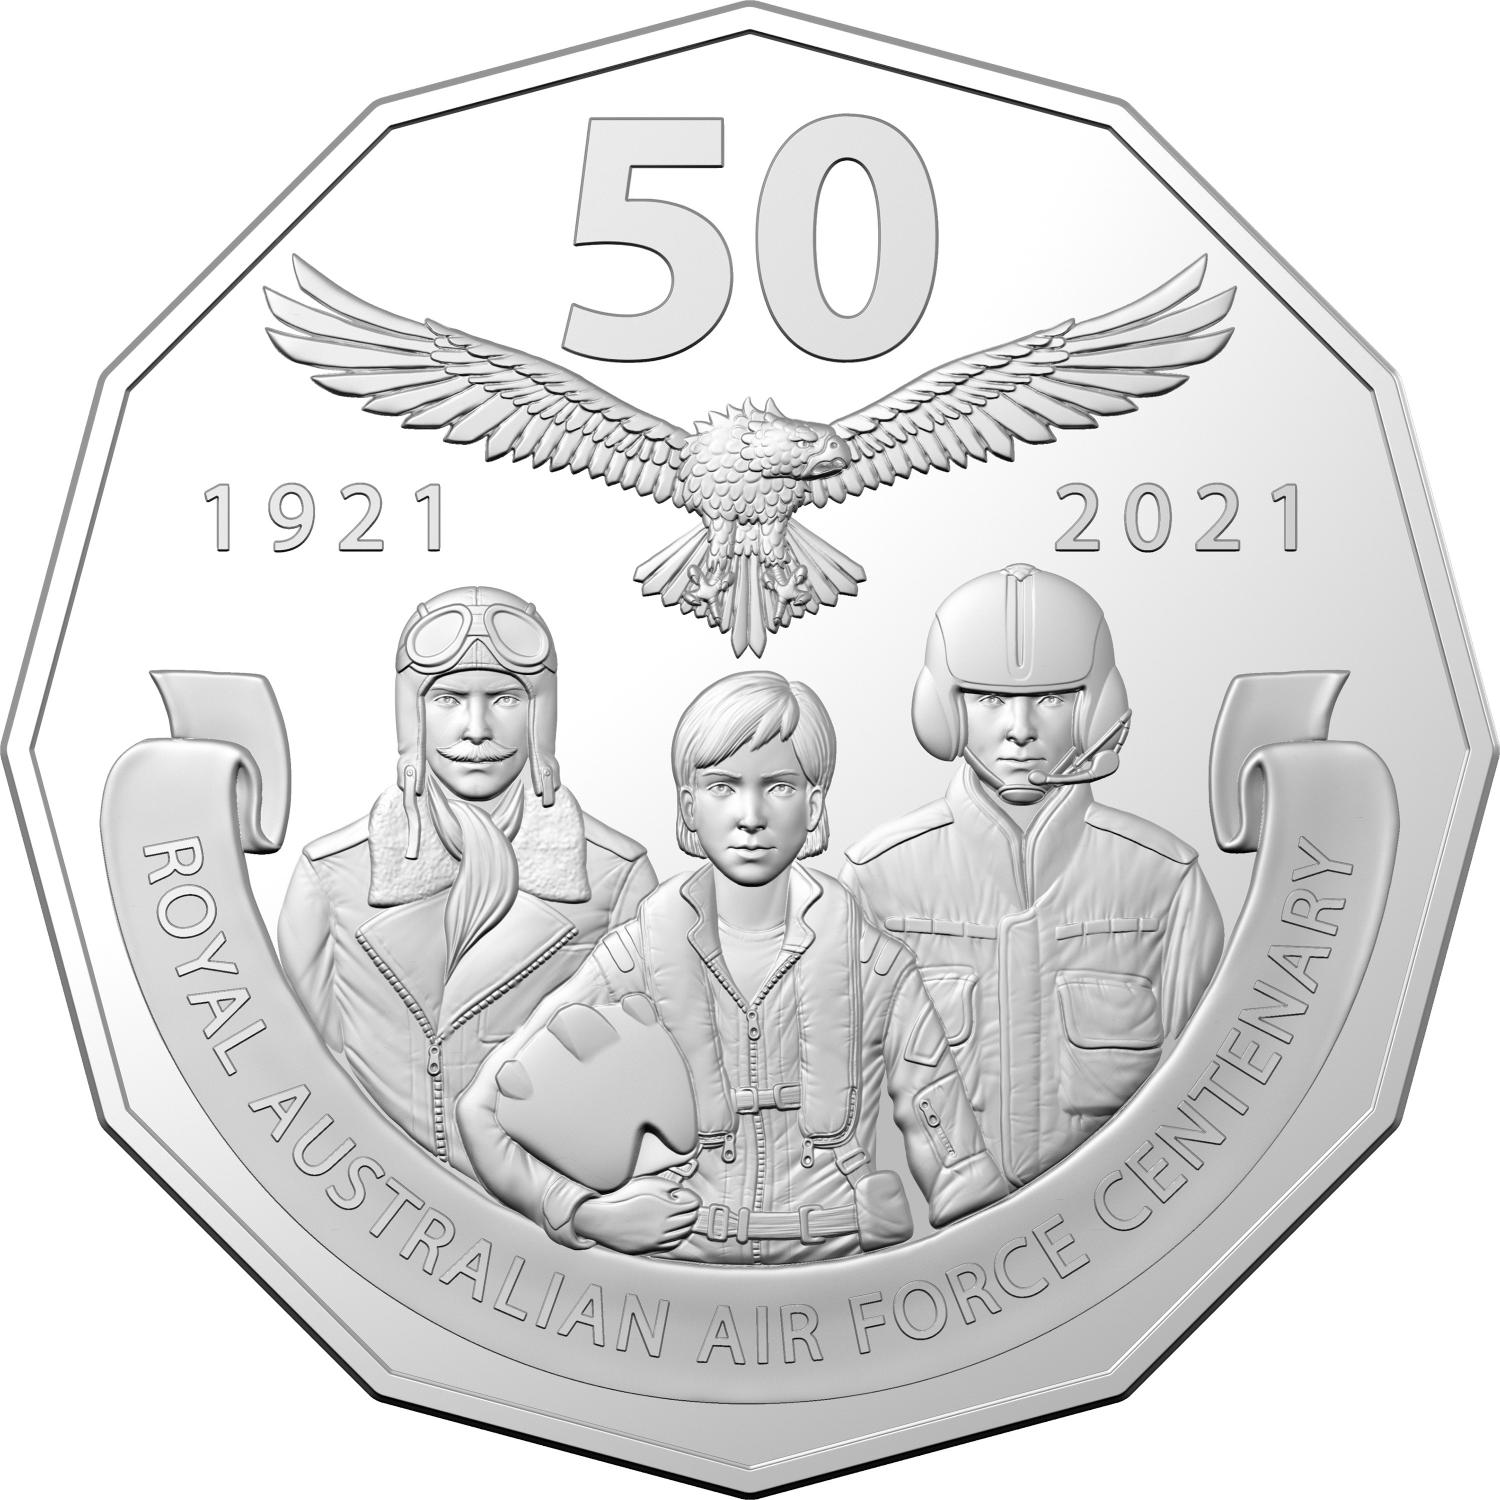 Thumbnail for 2021 Centenary of the Air Force - Air Power Fifty Cent Coin on Card